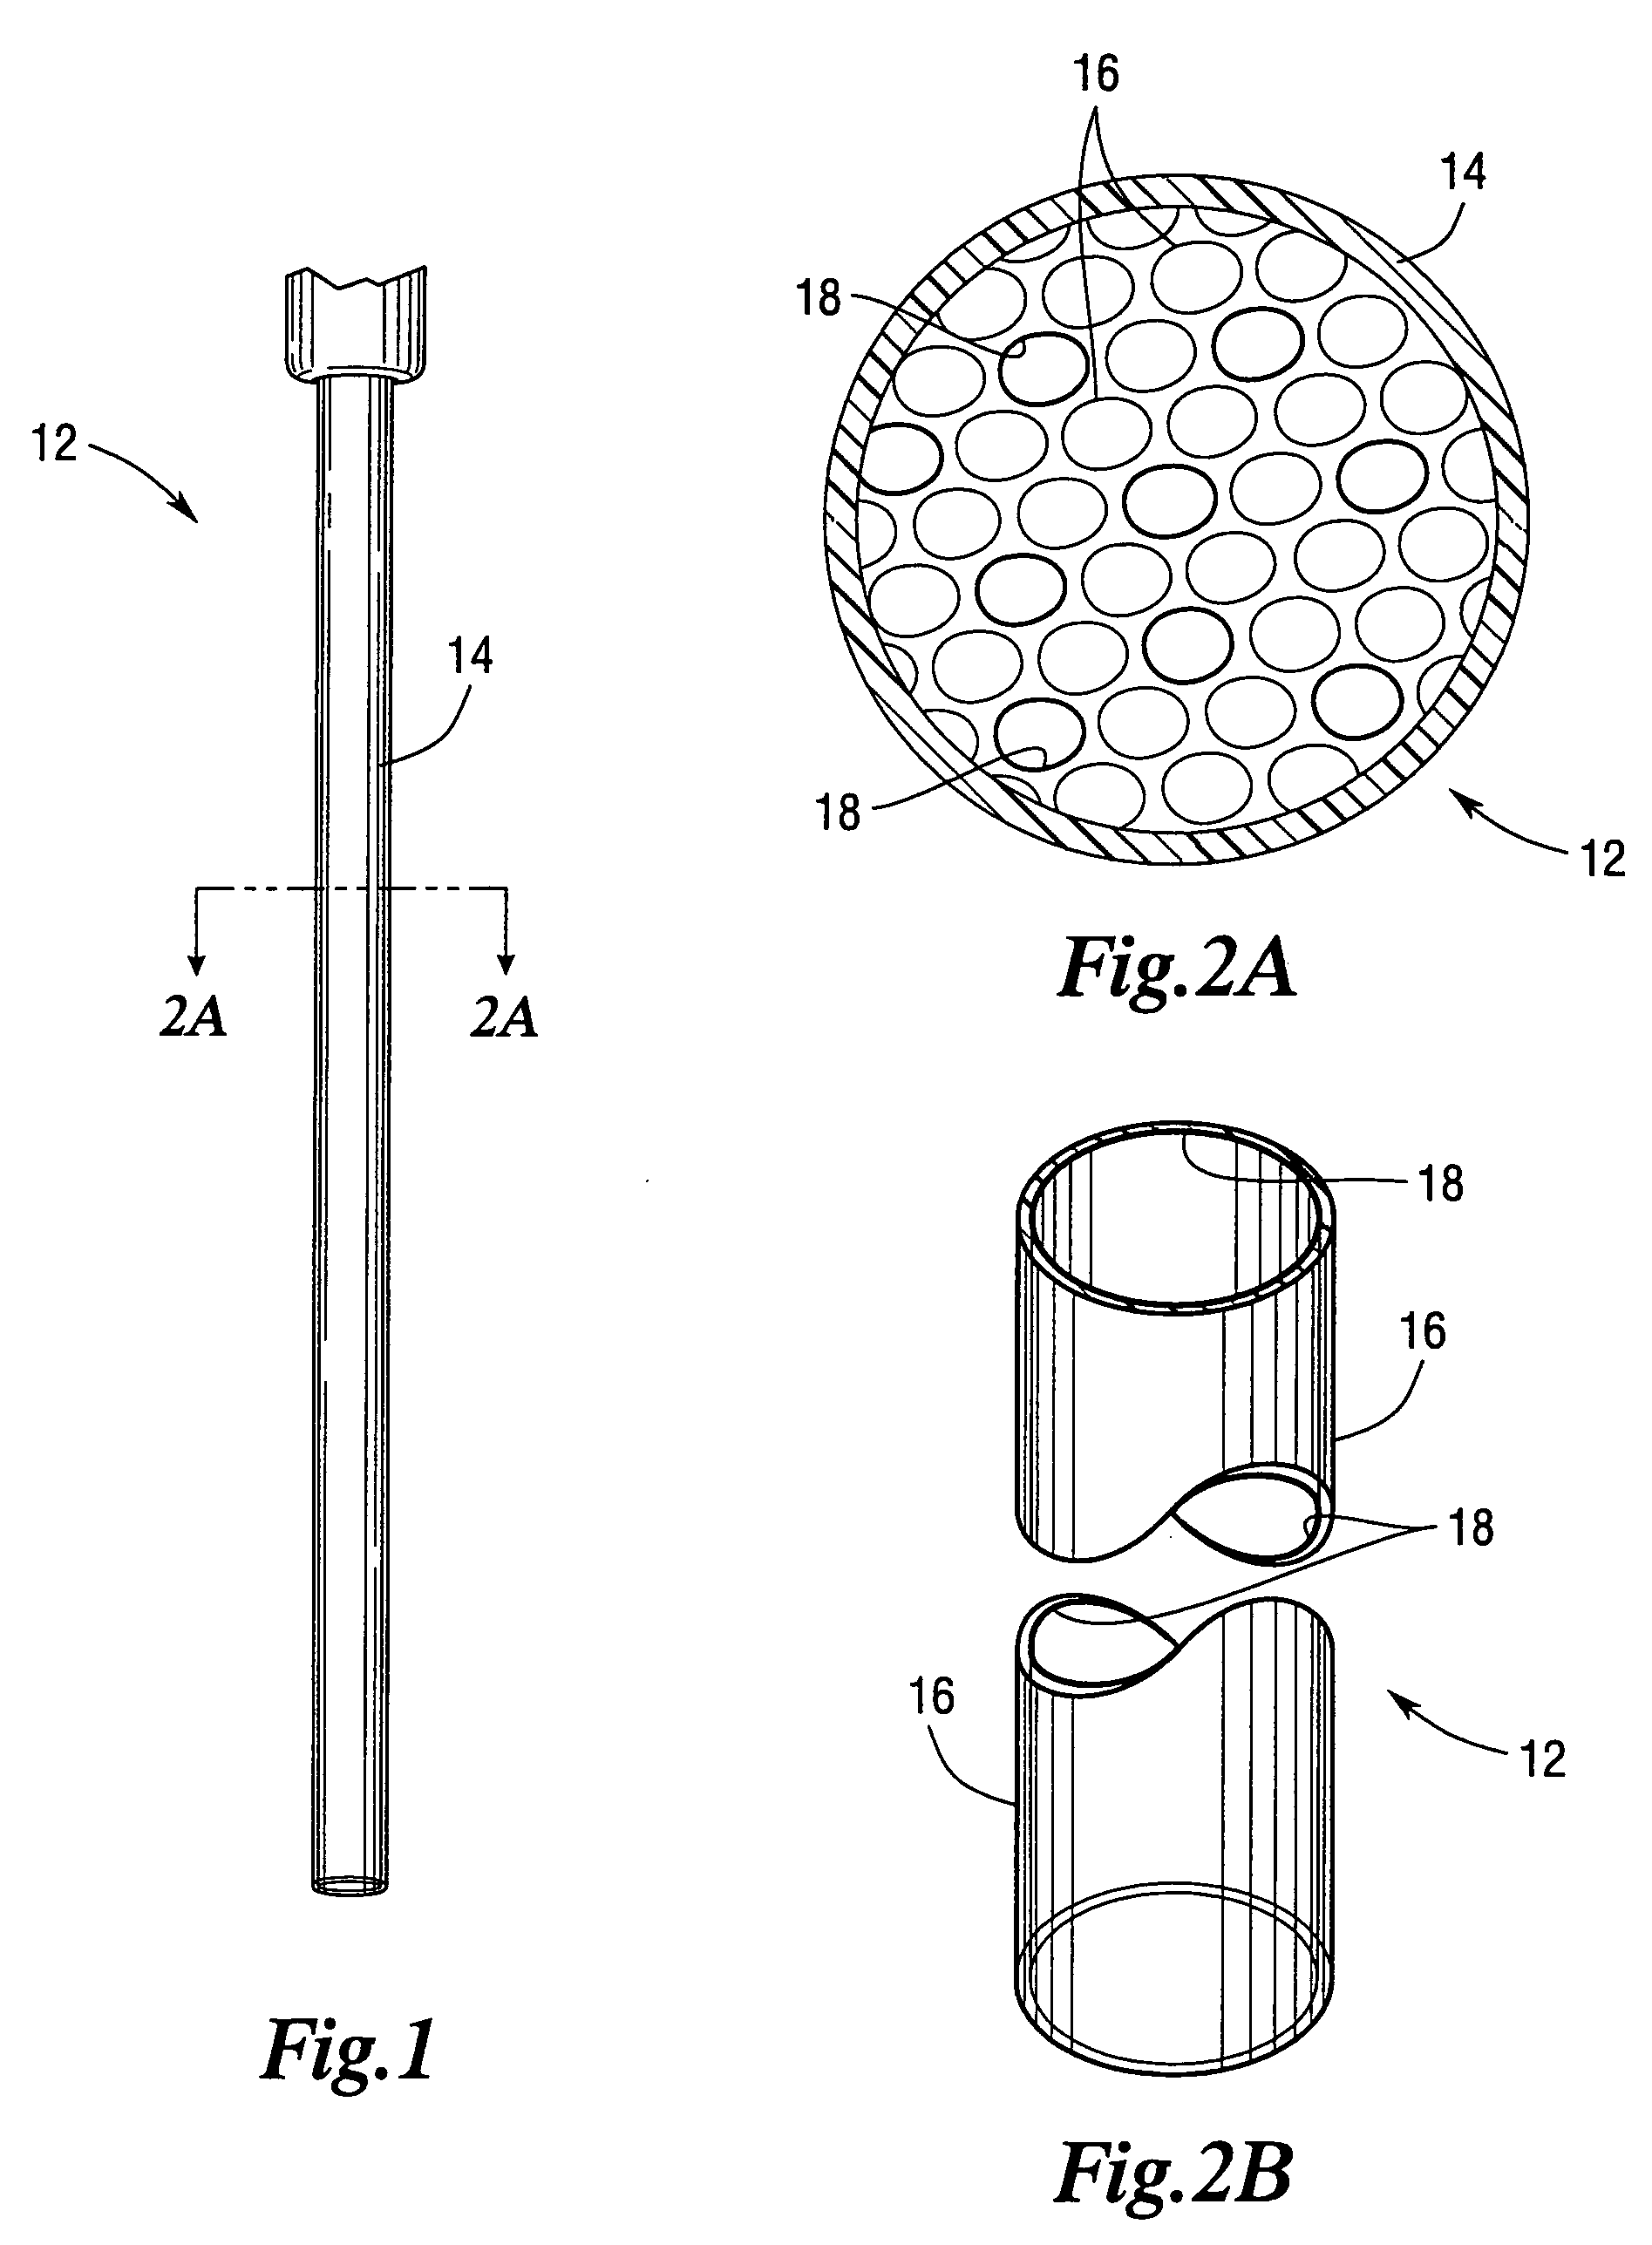 Multicapillary device for sample preparation